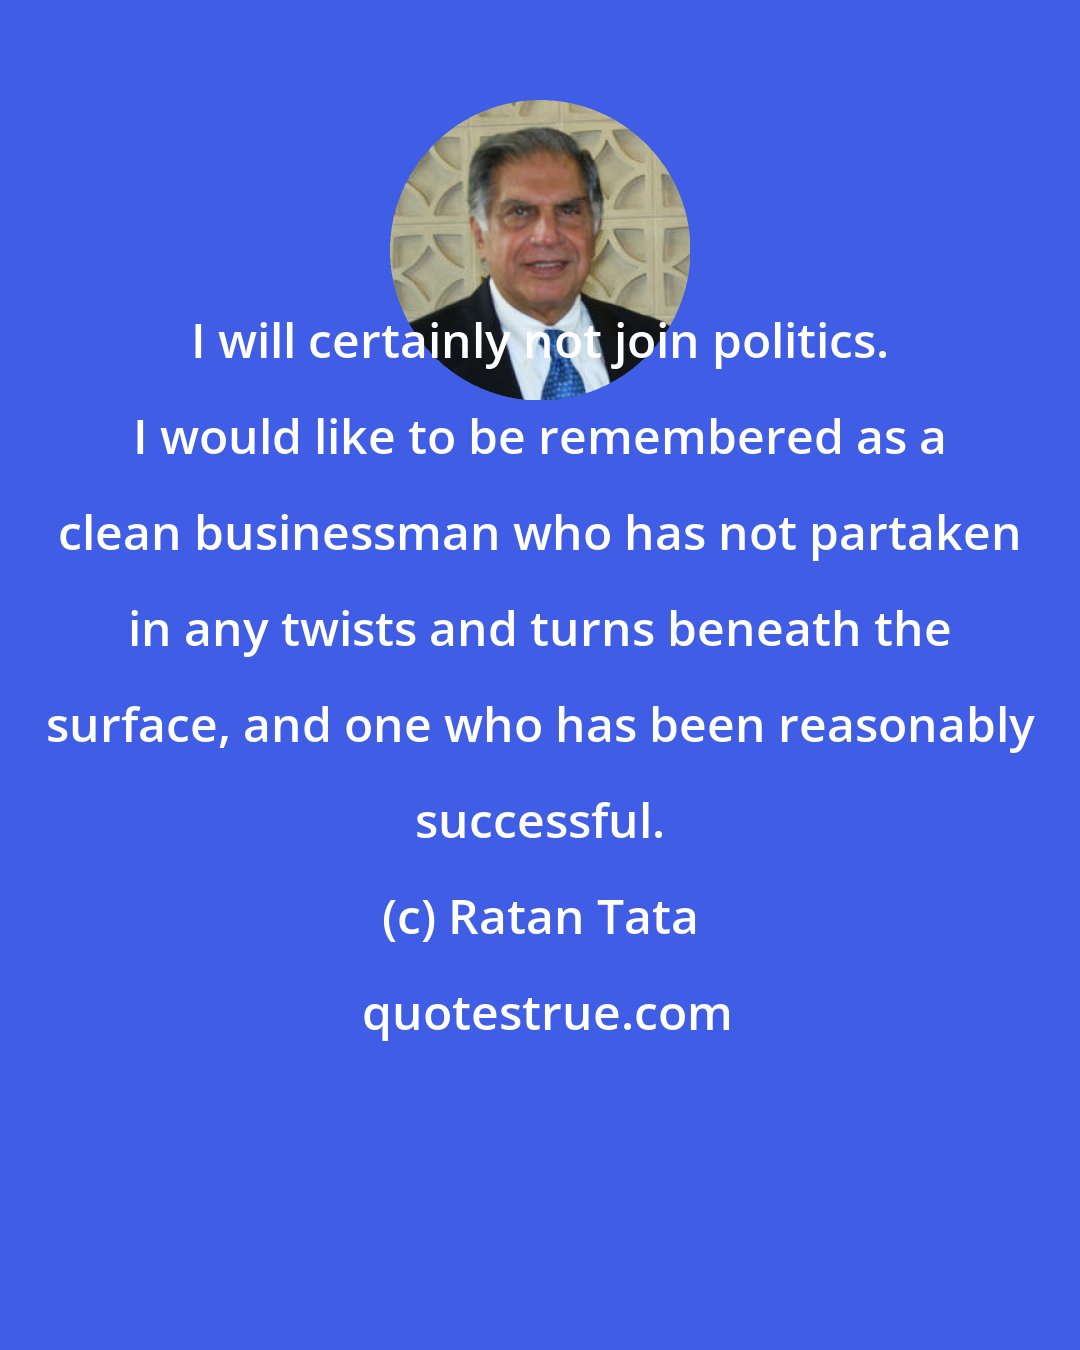 Ratan Tata: I will certainly not join politics. I would like to be remembered as a clean businessman who has not partaken in any twists and turns beneath the surface, and one who has been reasonably successful.